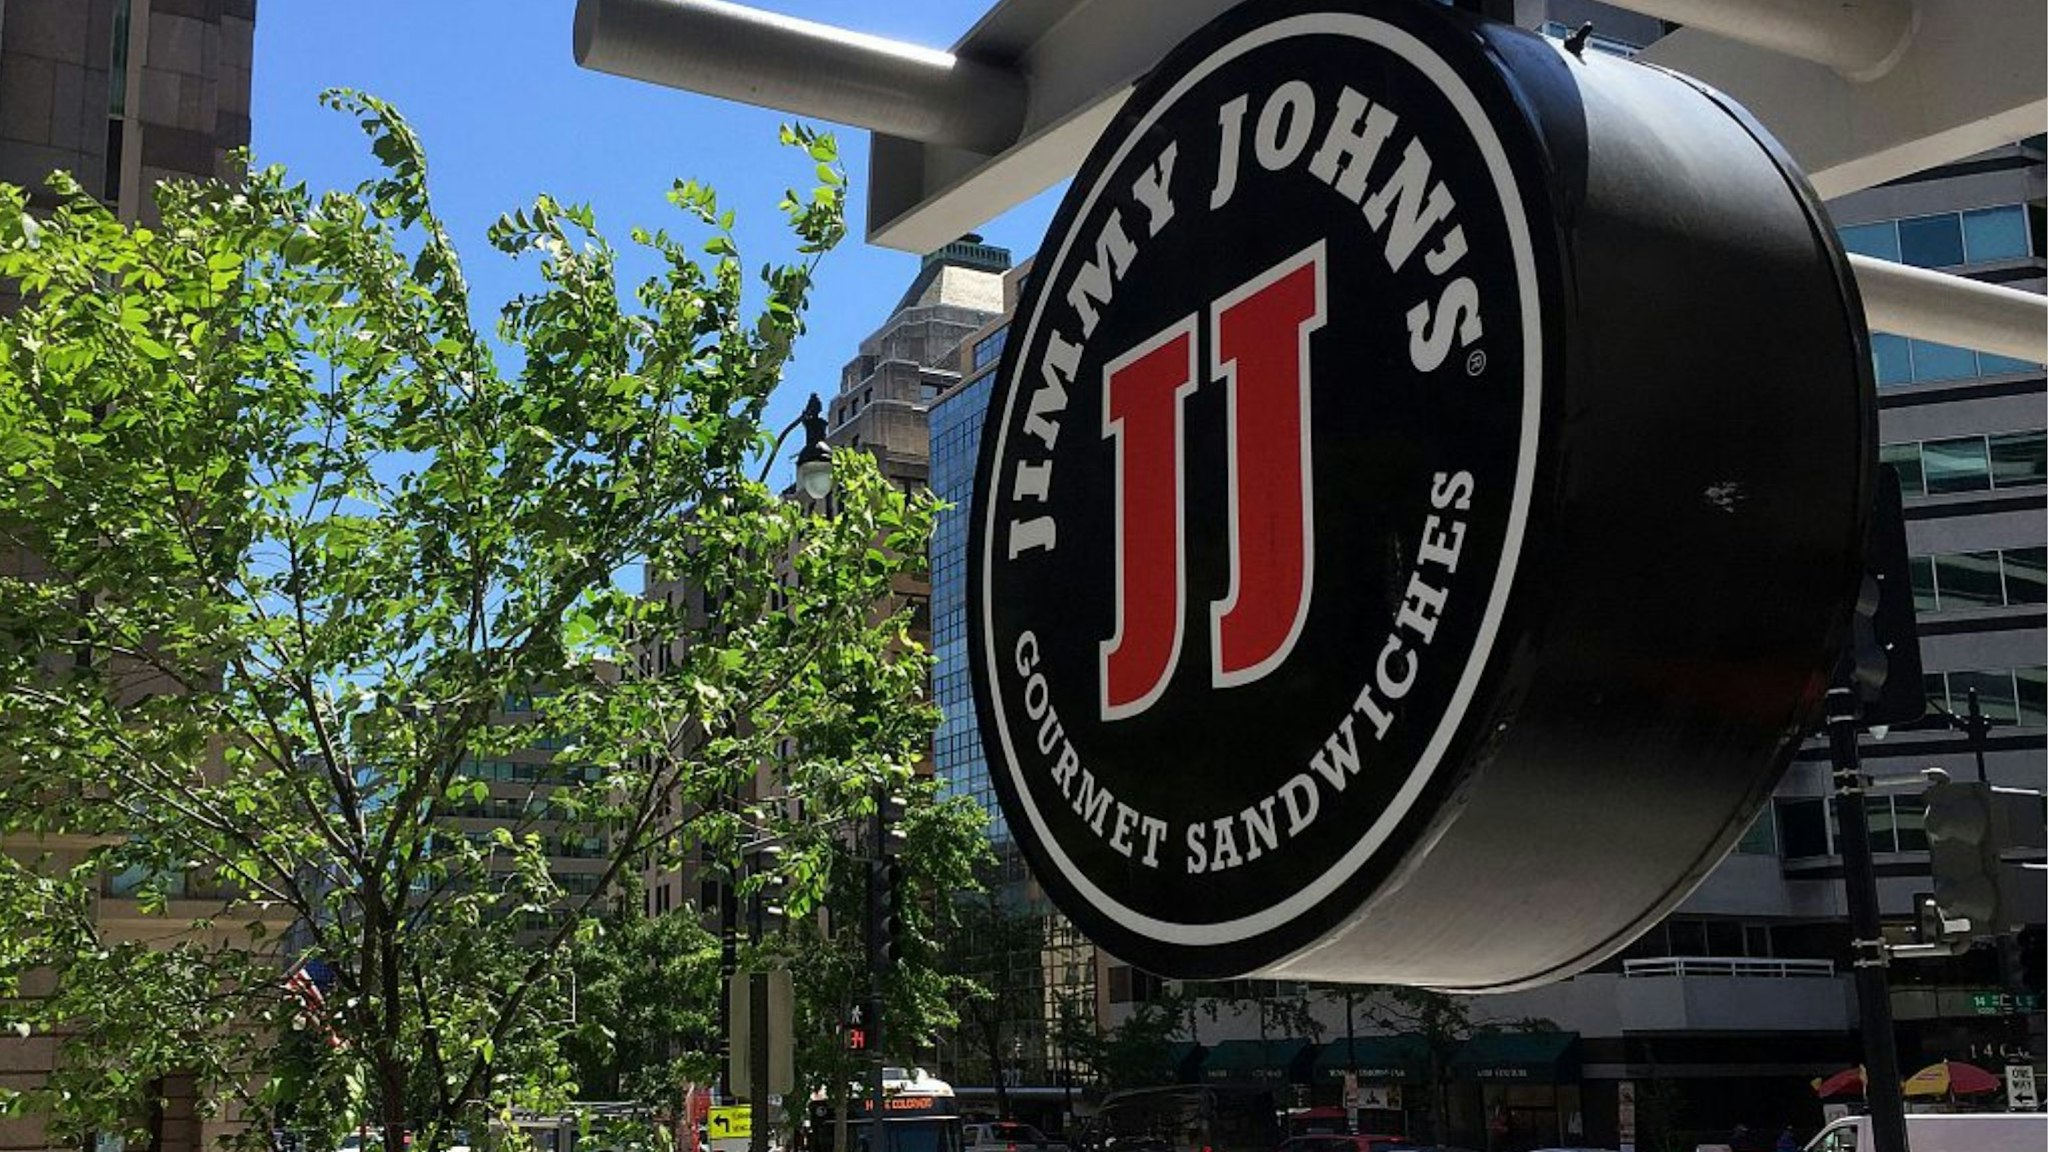 A logo of the sandwich restaurant chain, specializing in delivery Jimmy John's hangs outside one of their shops in downtown Washington, DC, June 9, 2016